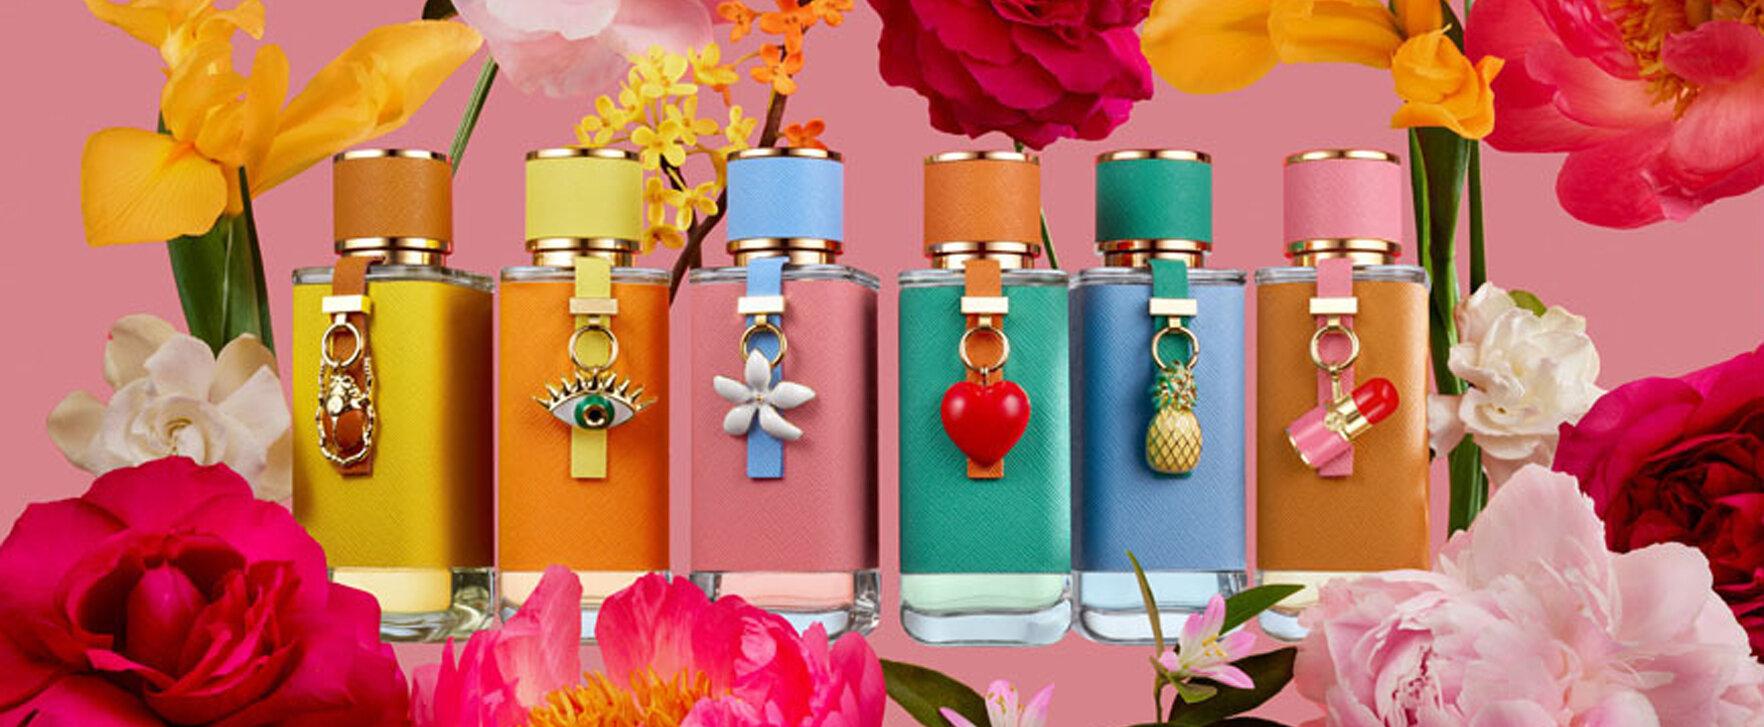 “Lucky Charms Collection” - Carolina Herrera Presents New Fragrance Line